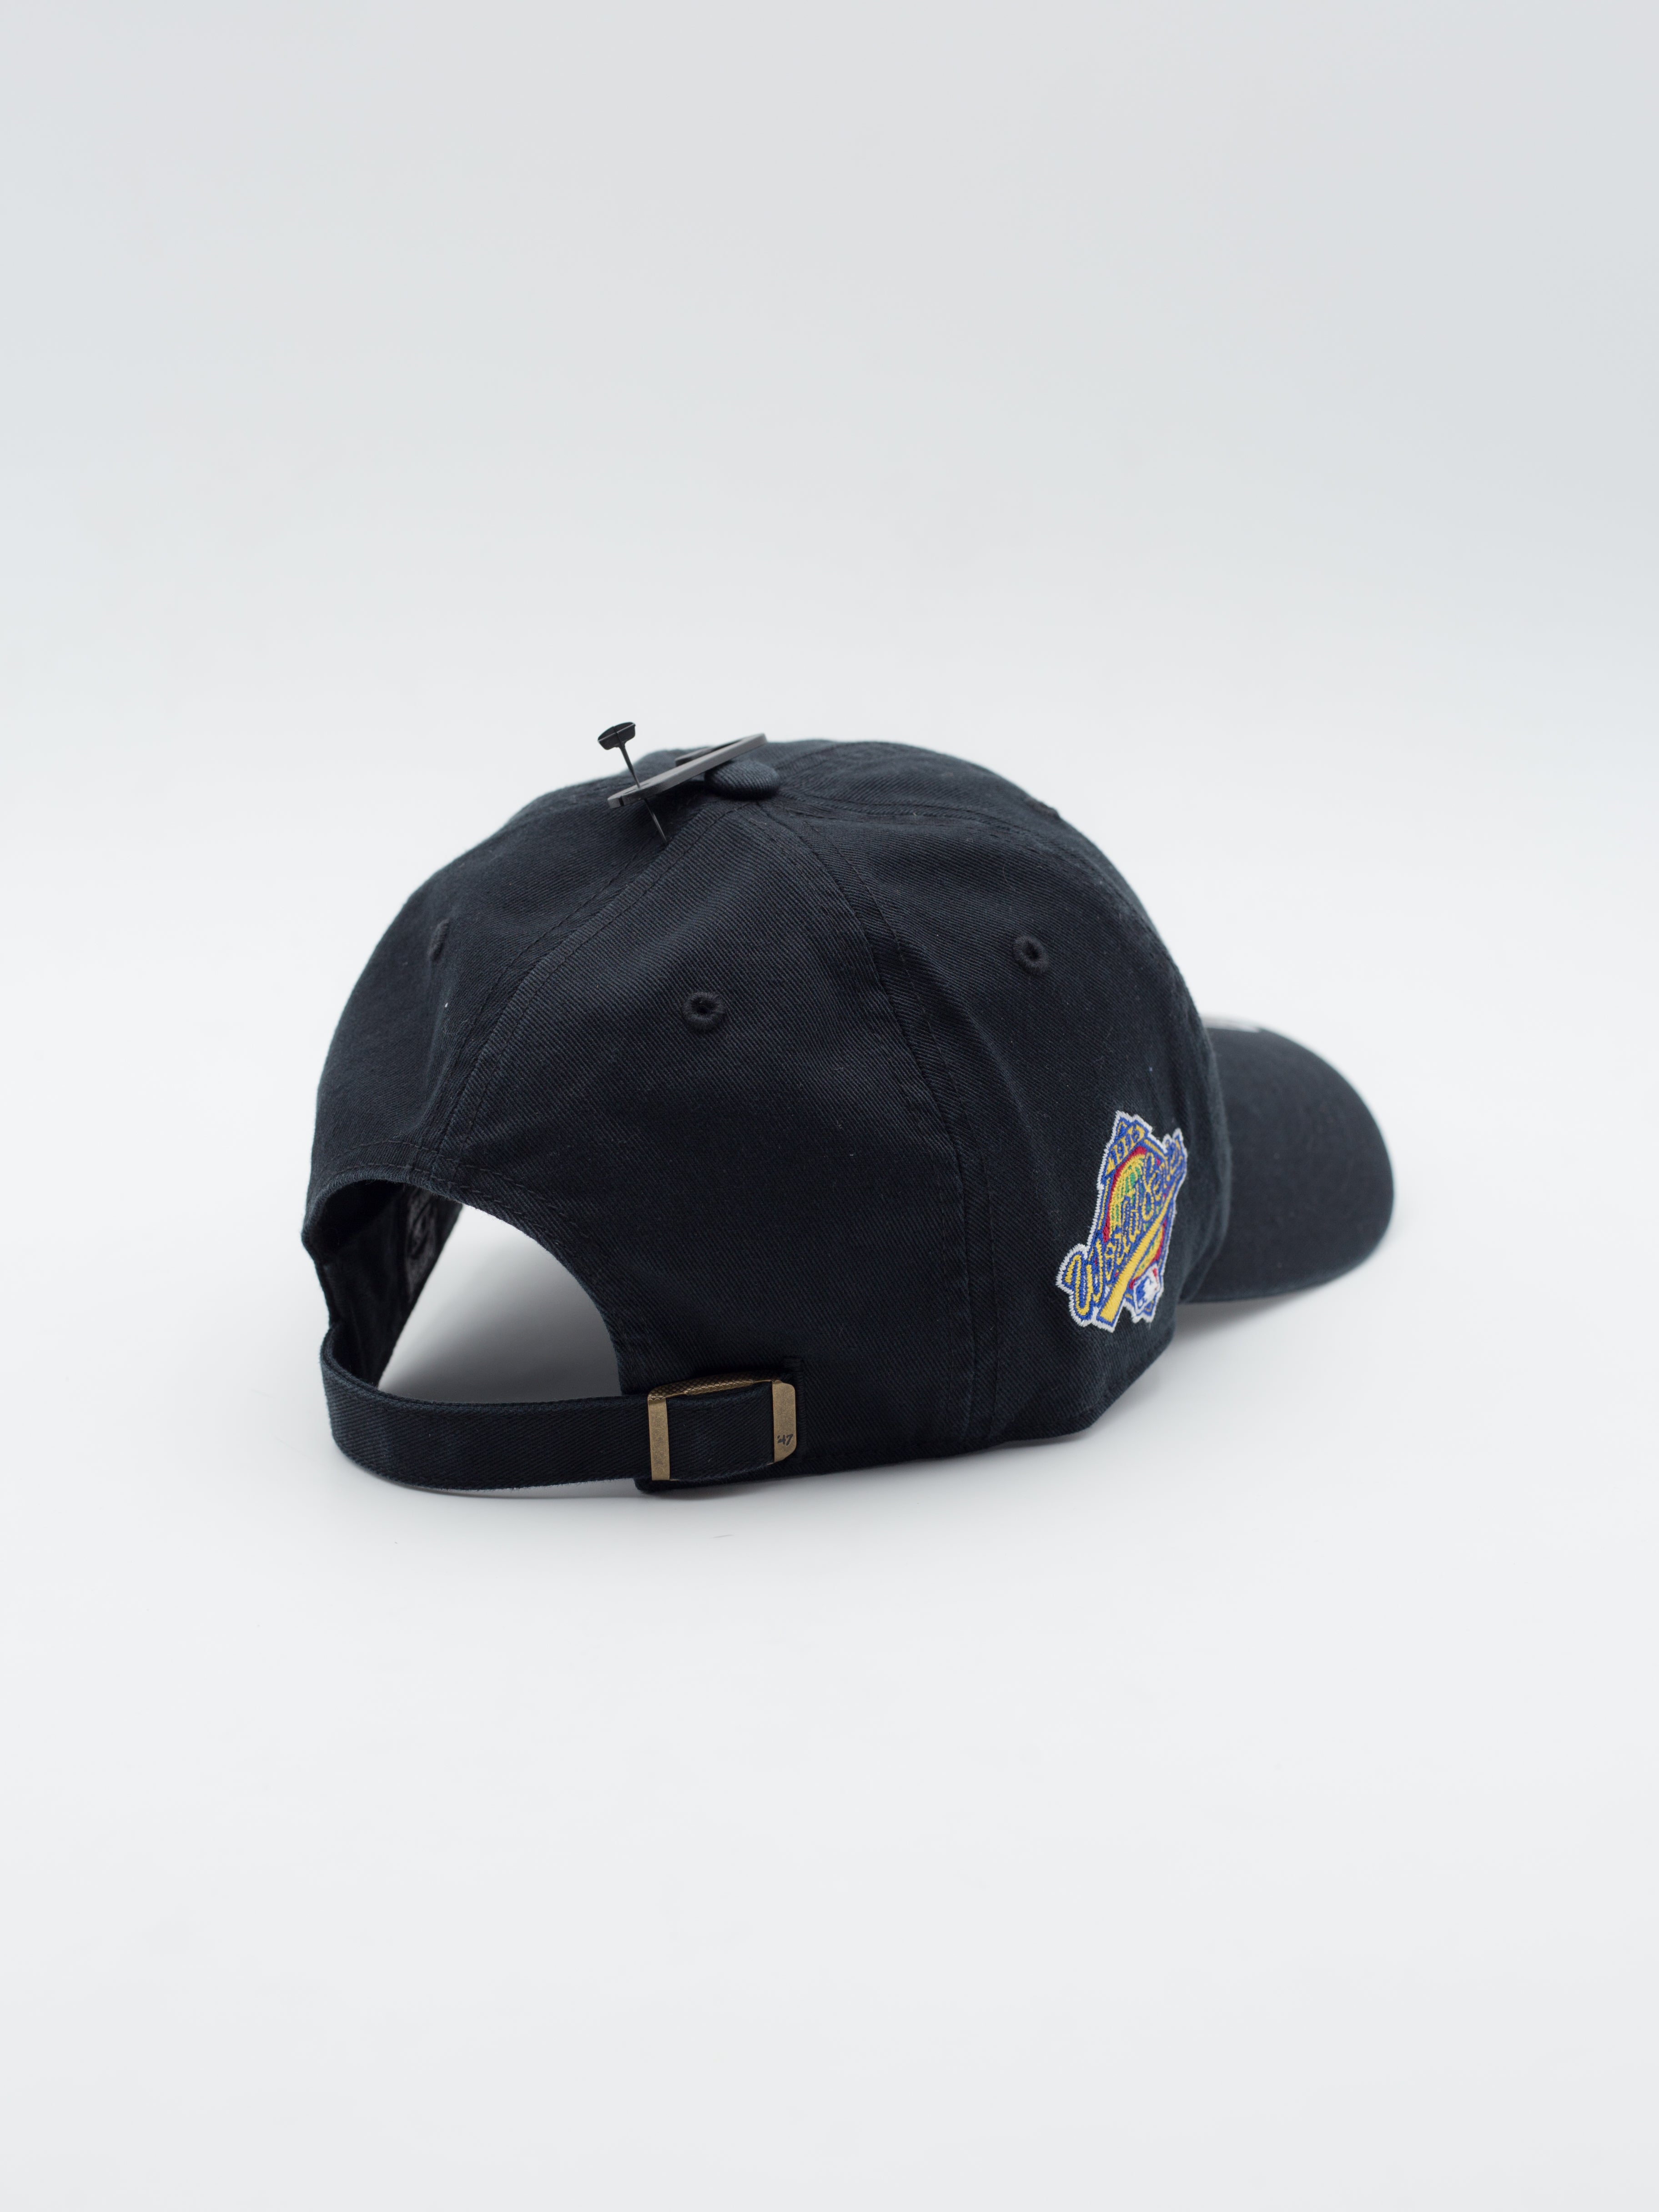 CLEAN UP New York Yankees Sidepatch Black